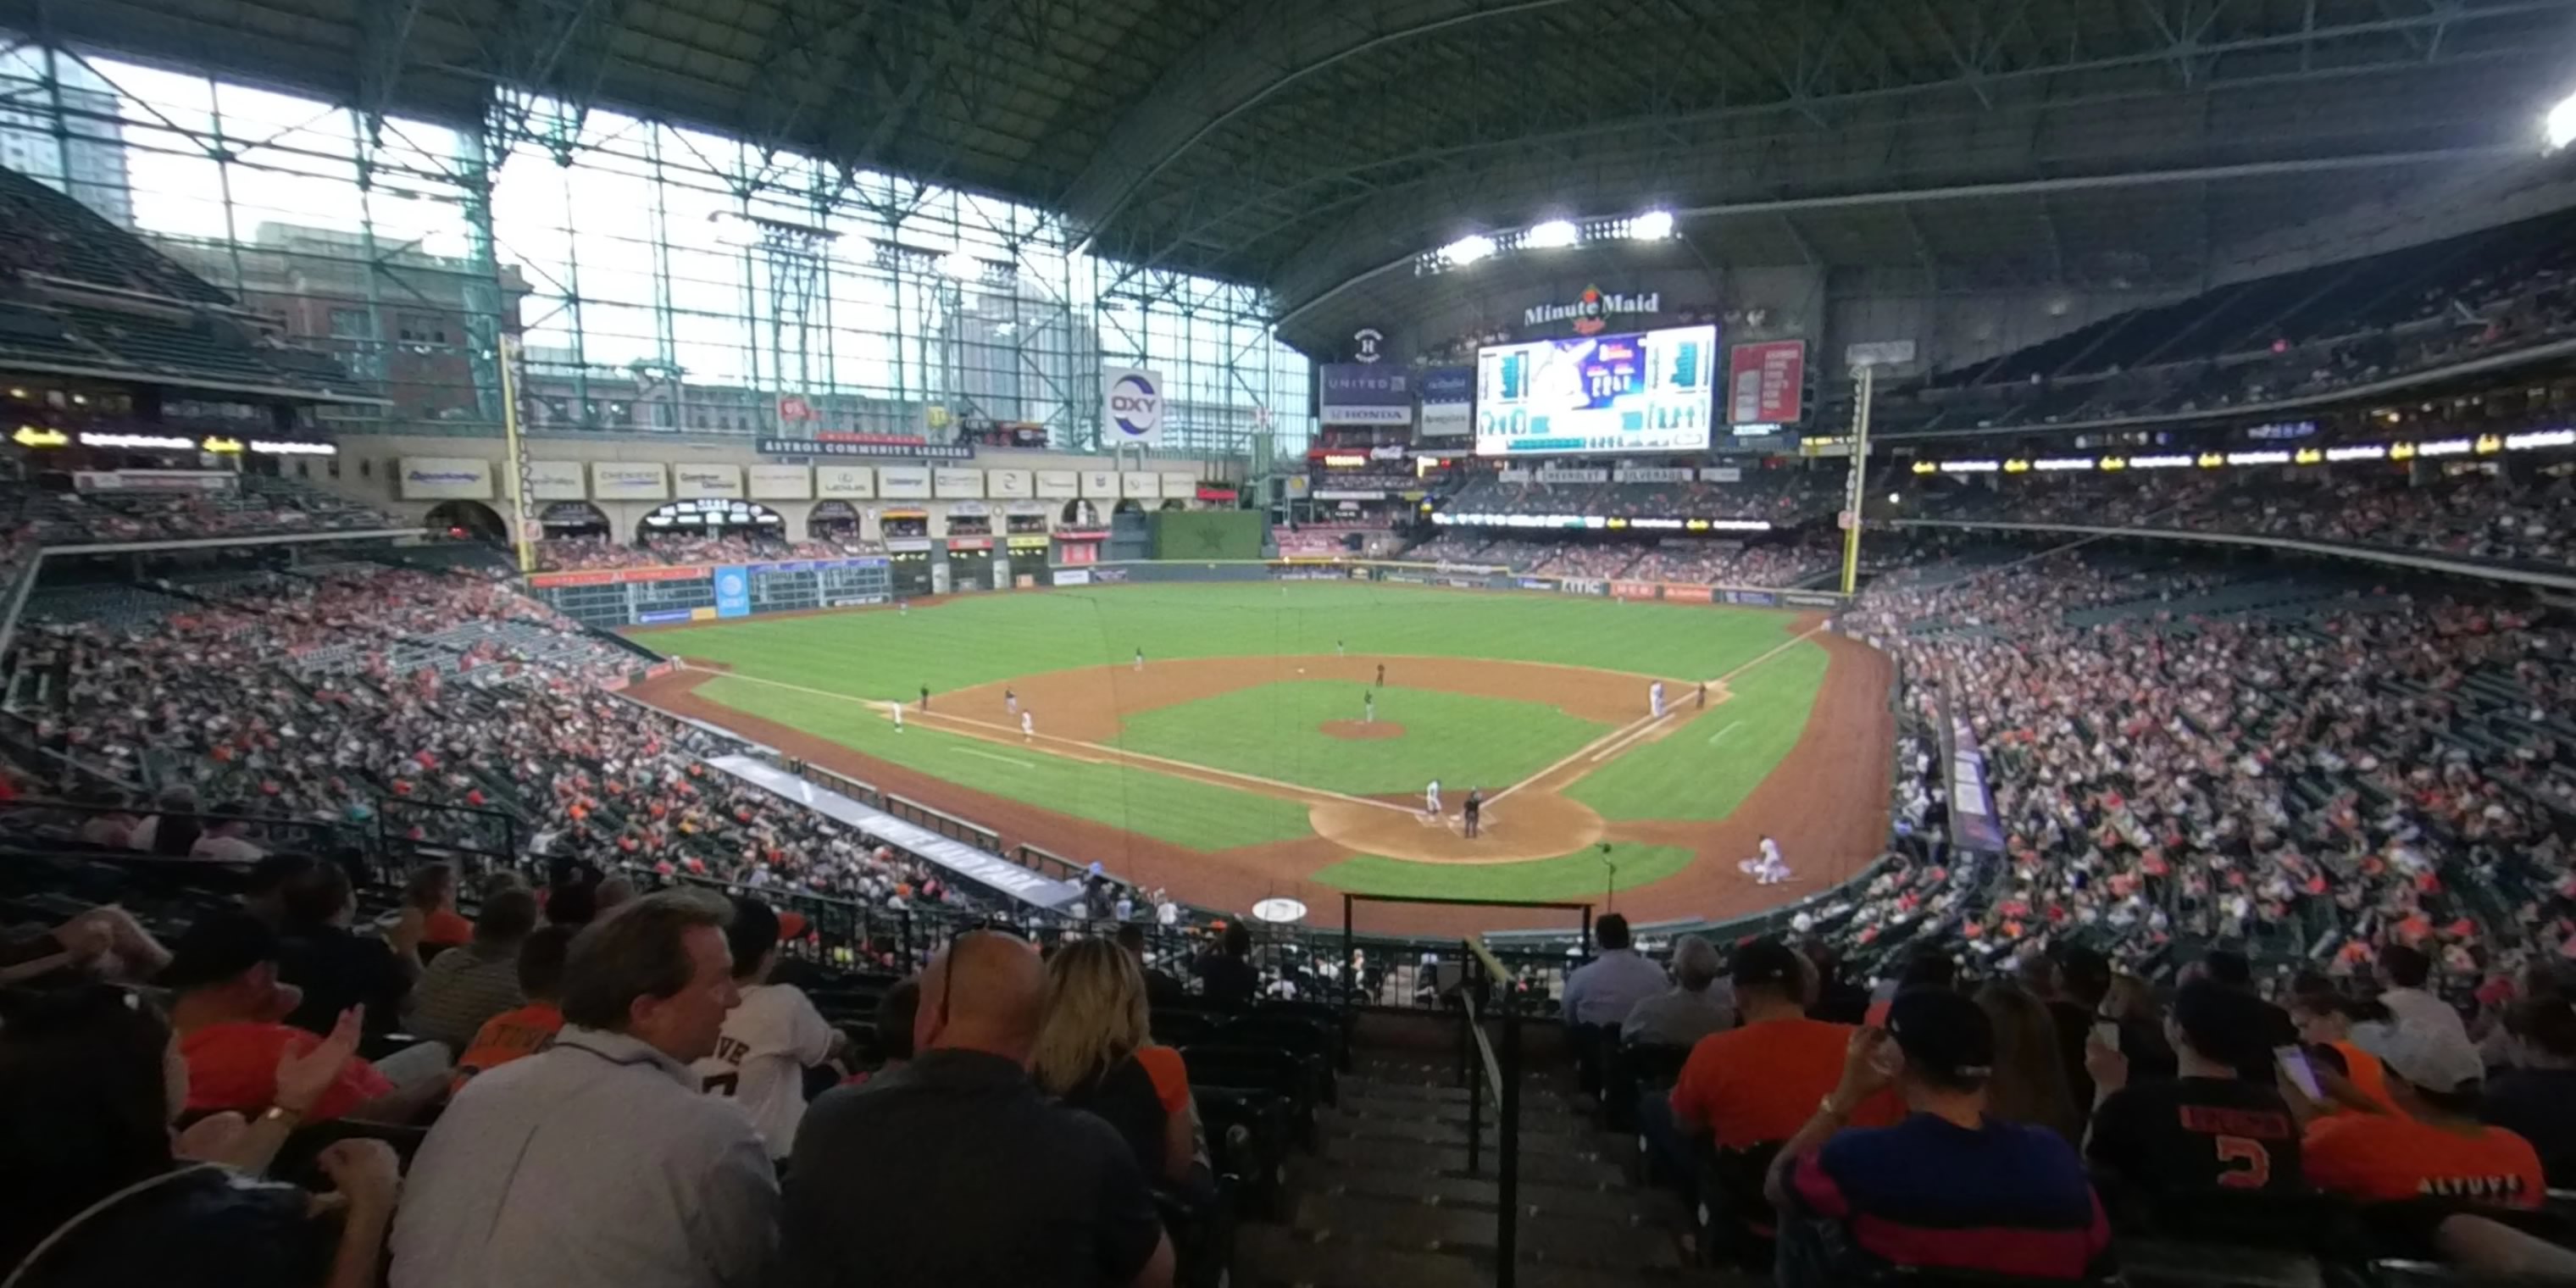 section 217 panoramic seat view  for baseball - minute maid park